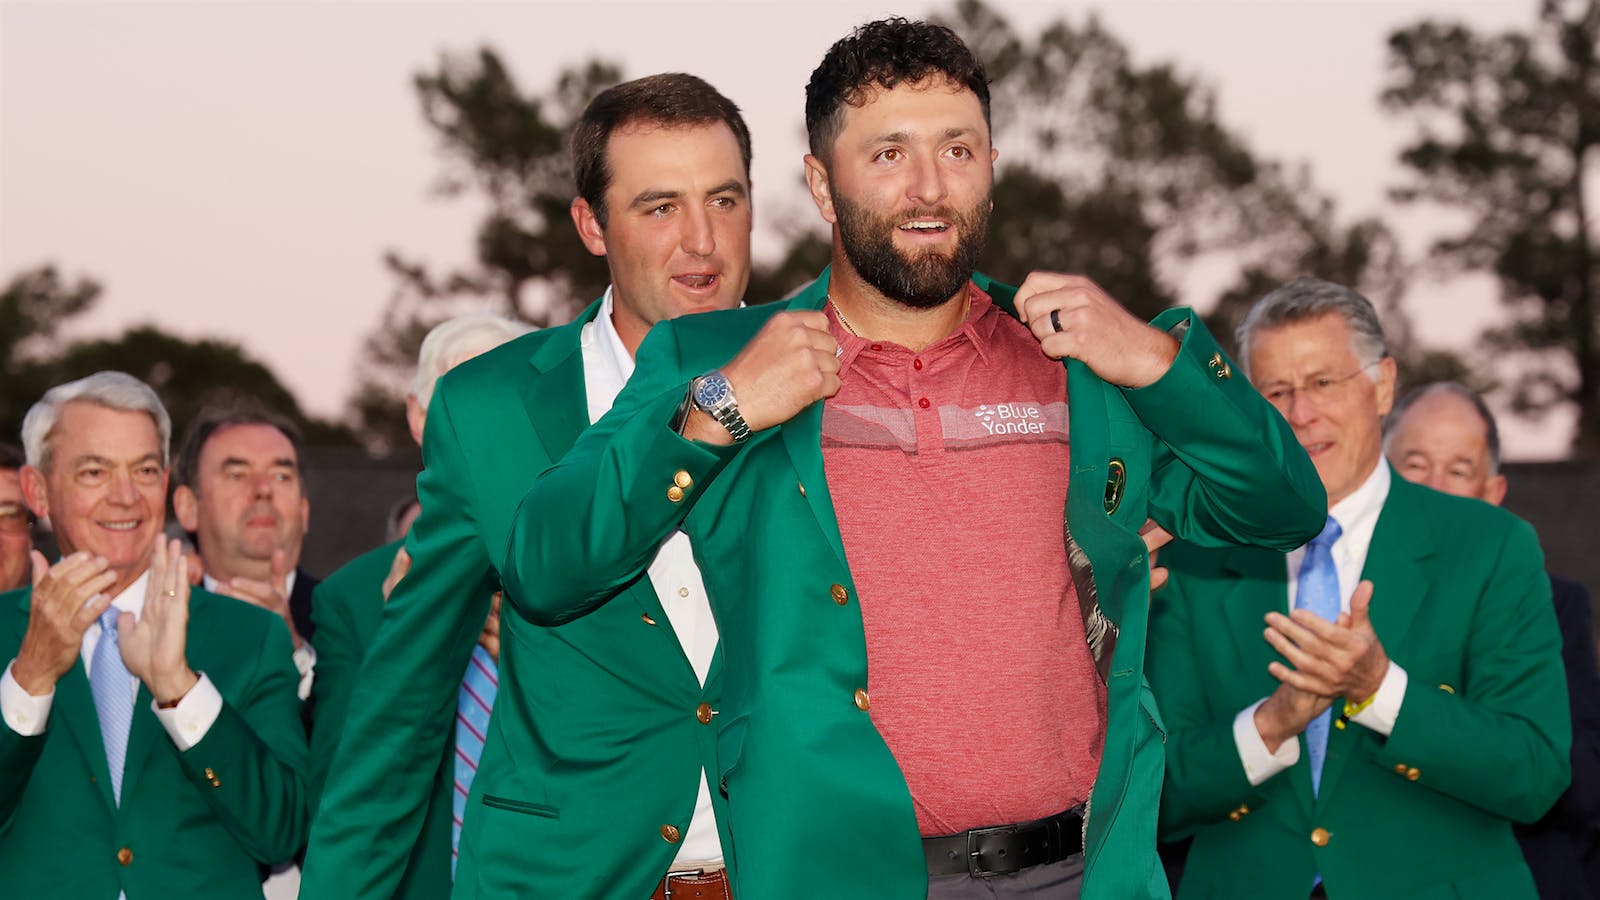 Golfer Scottie Scheffler helps put the Champion's green jacket on Jon Rahm at the 2023 Masters Tournament, as other former Champions applaud.